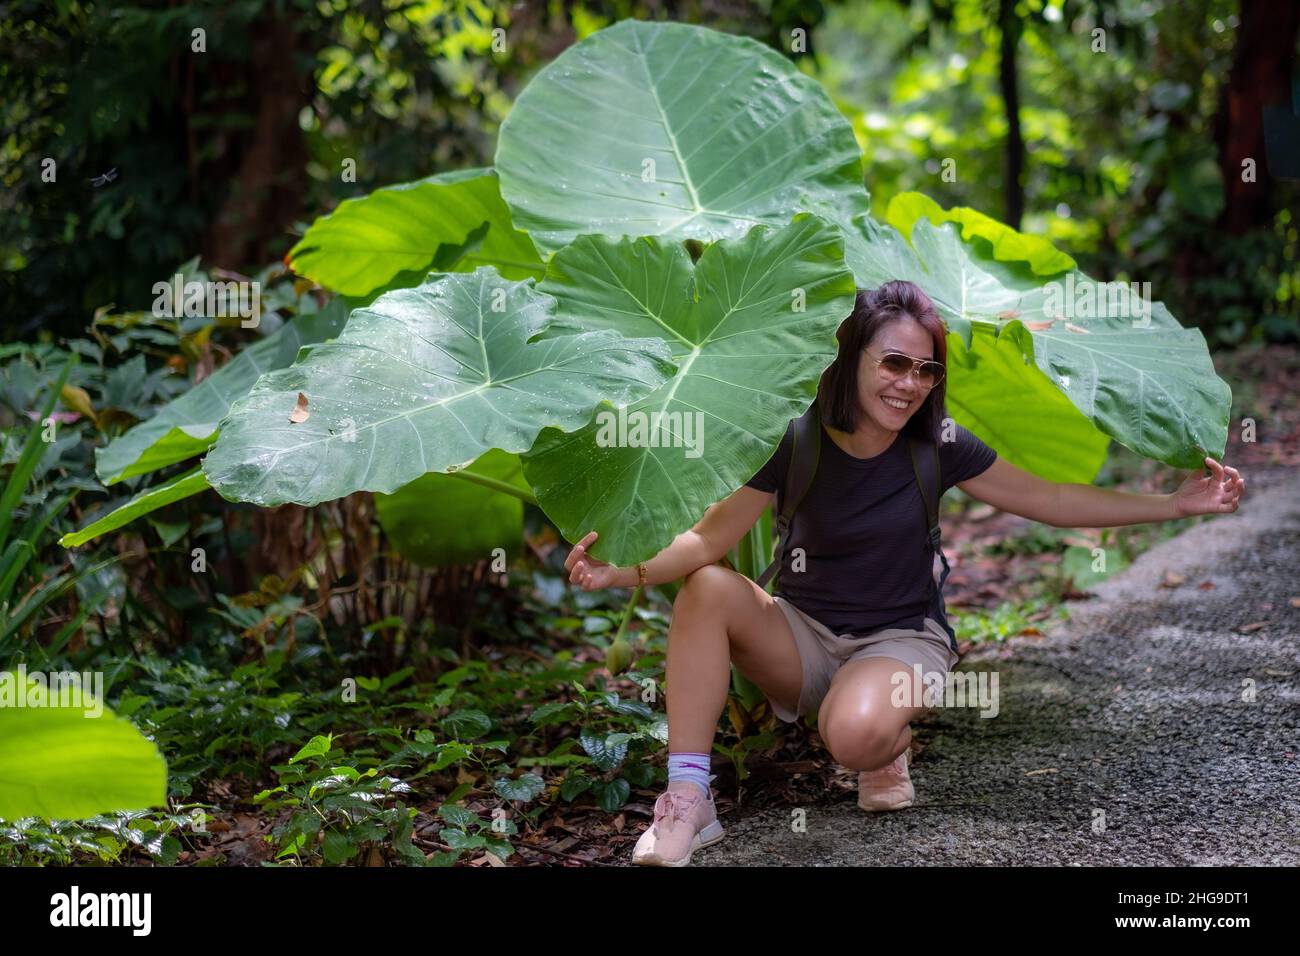 Smiling woman crouching by an oversized plant in a park, Malaysia Stock Photo